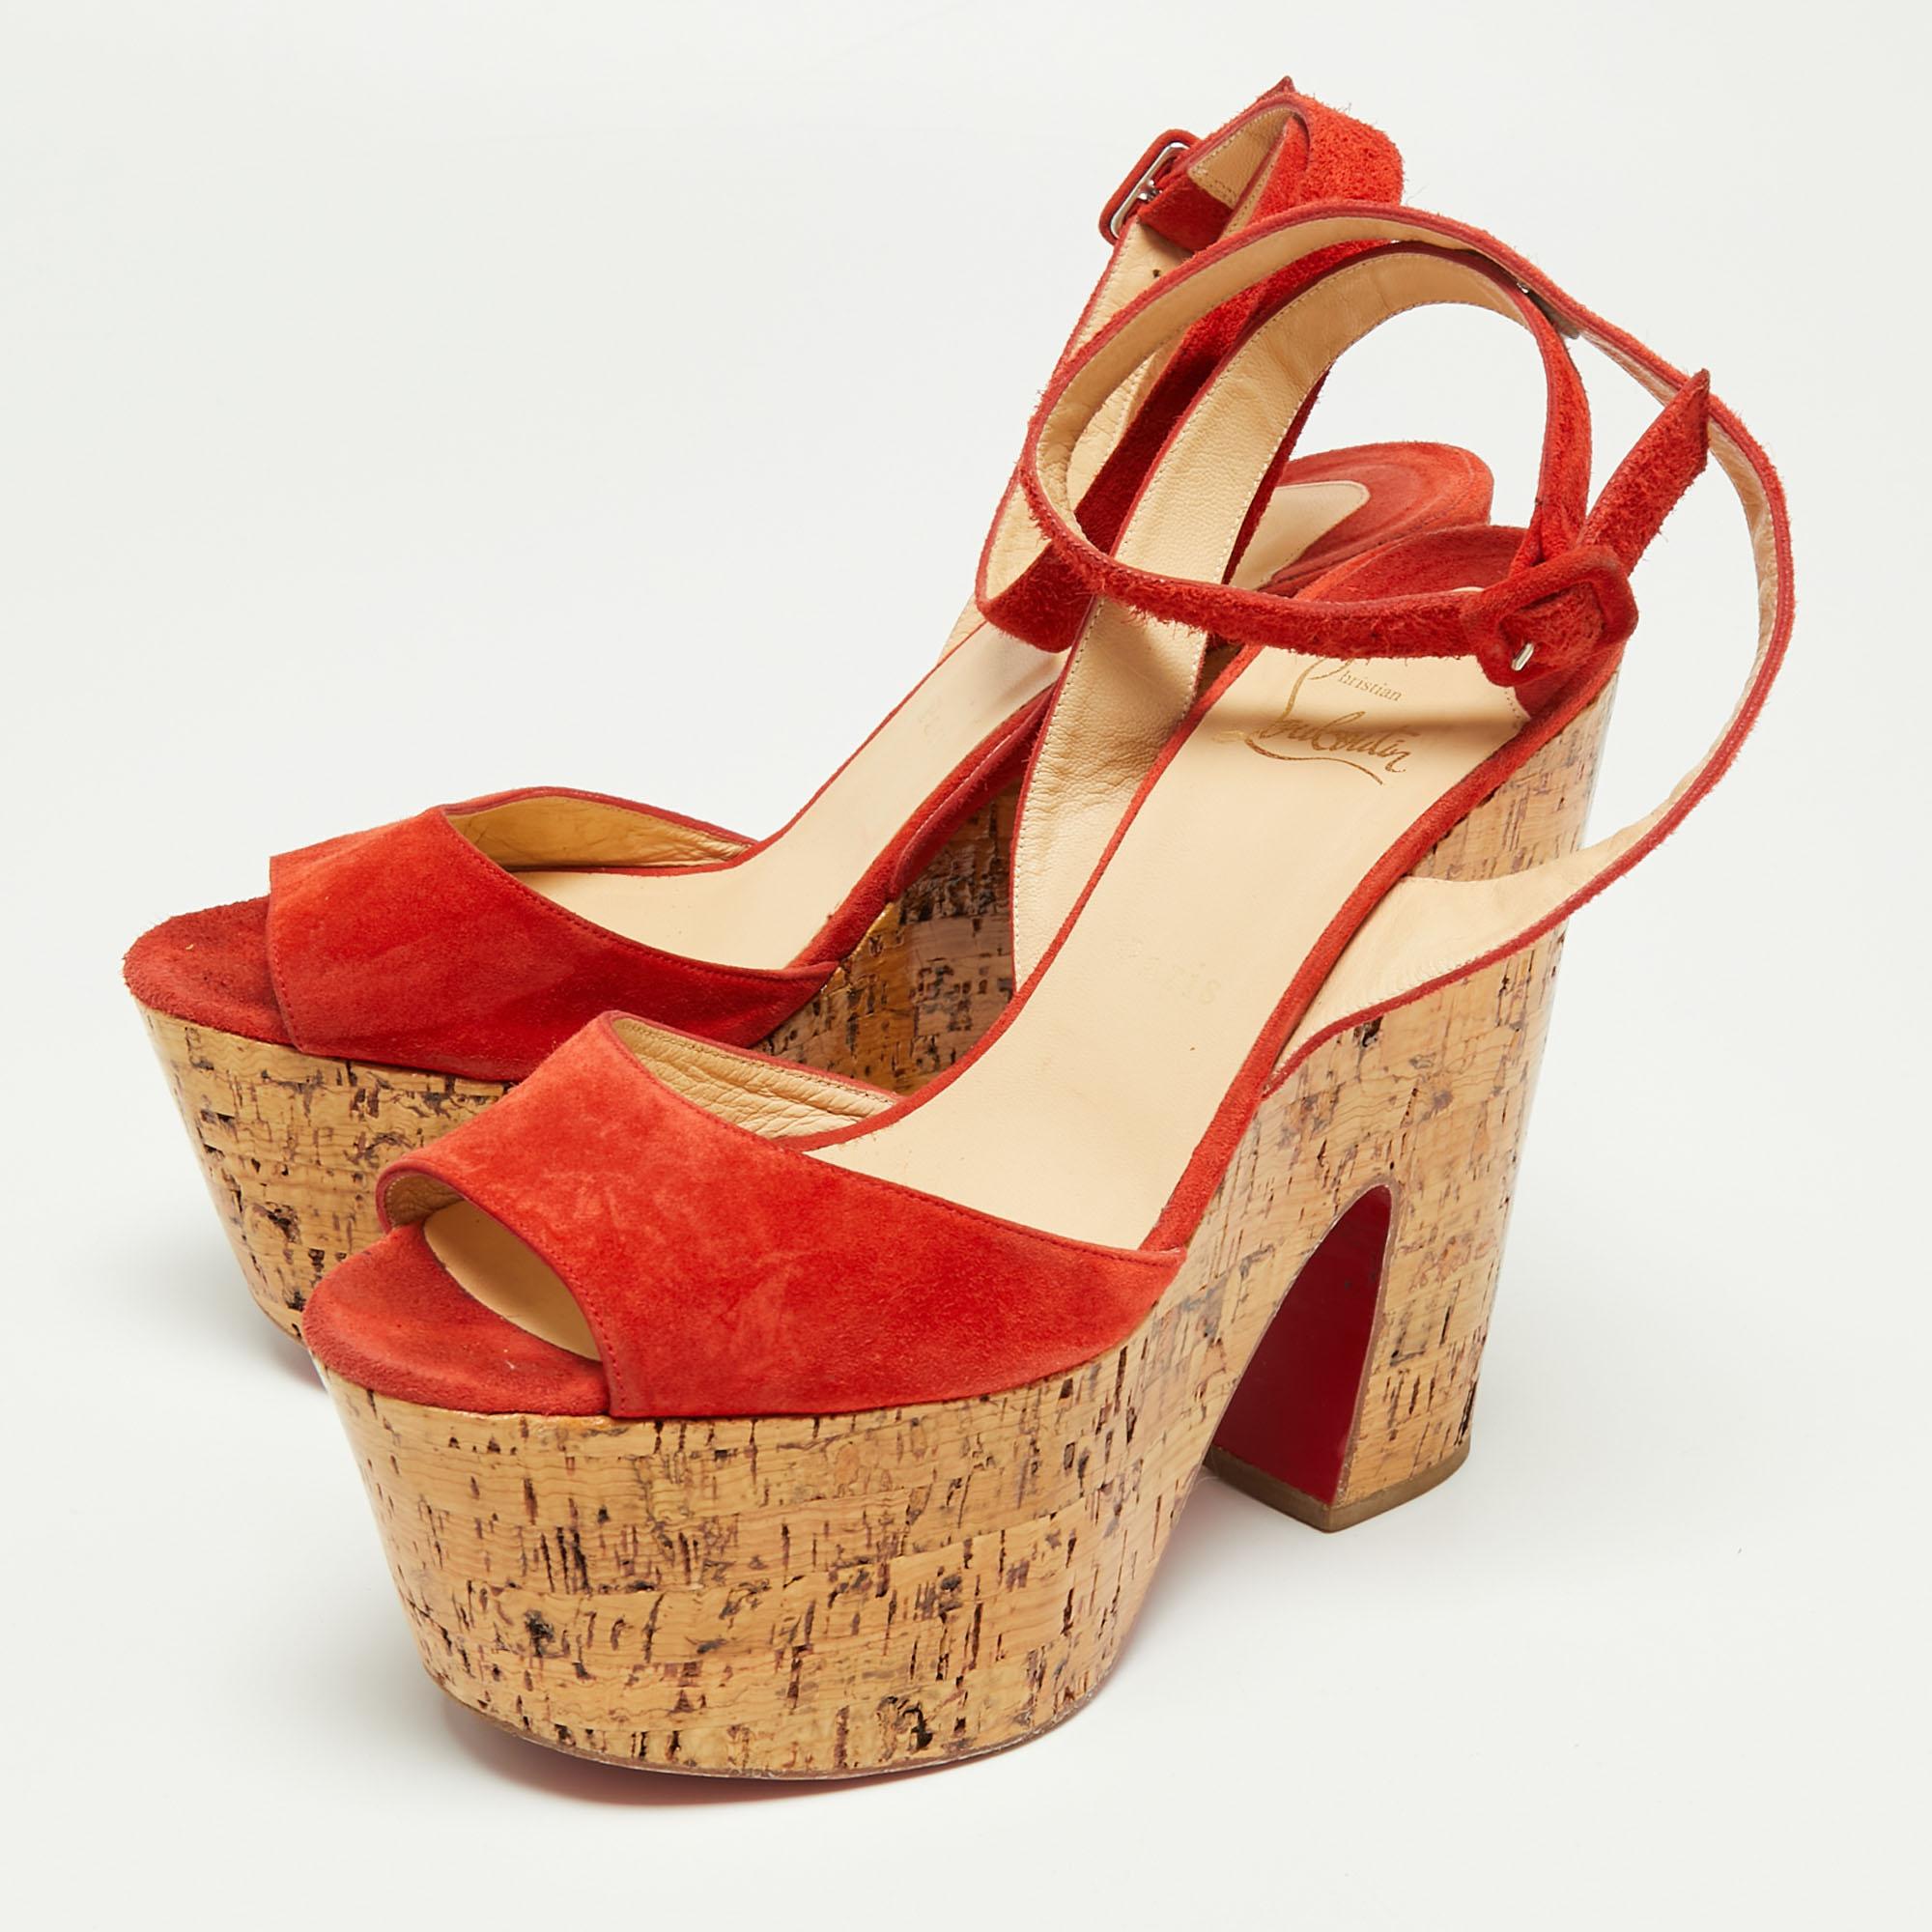 Flaunt never-ending luxury and elegance in these fabulous sandals from Christian Louboutin. They are created using red suede and showcase cork-wedge heels, open toes, and an ankle strap. Your ensemble will look chic with these CL sandals.

